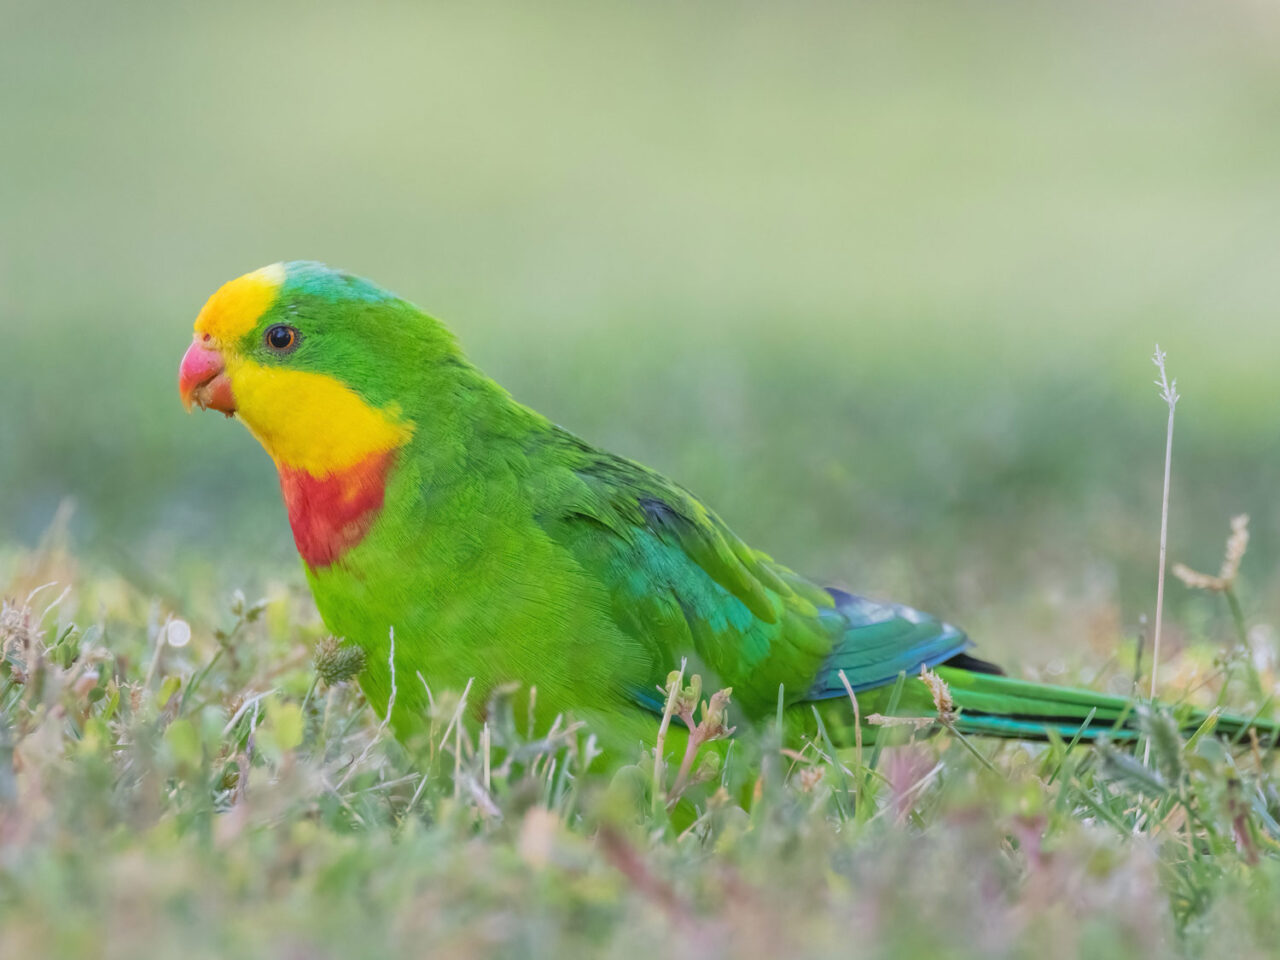 A parrot with a yellow face and red chest stands in short grass.